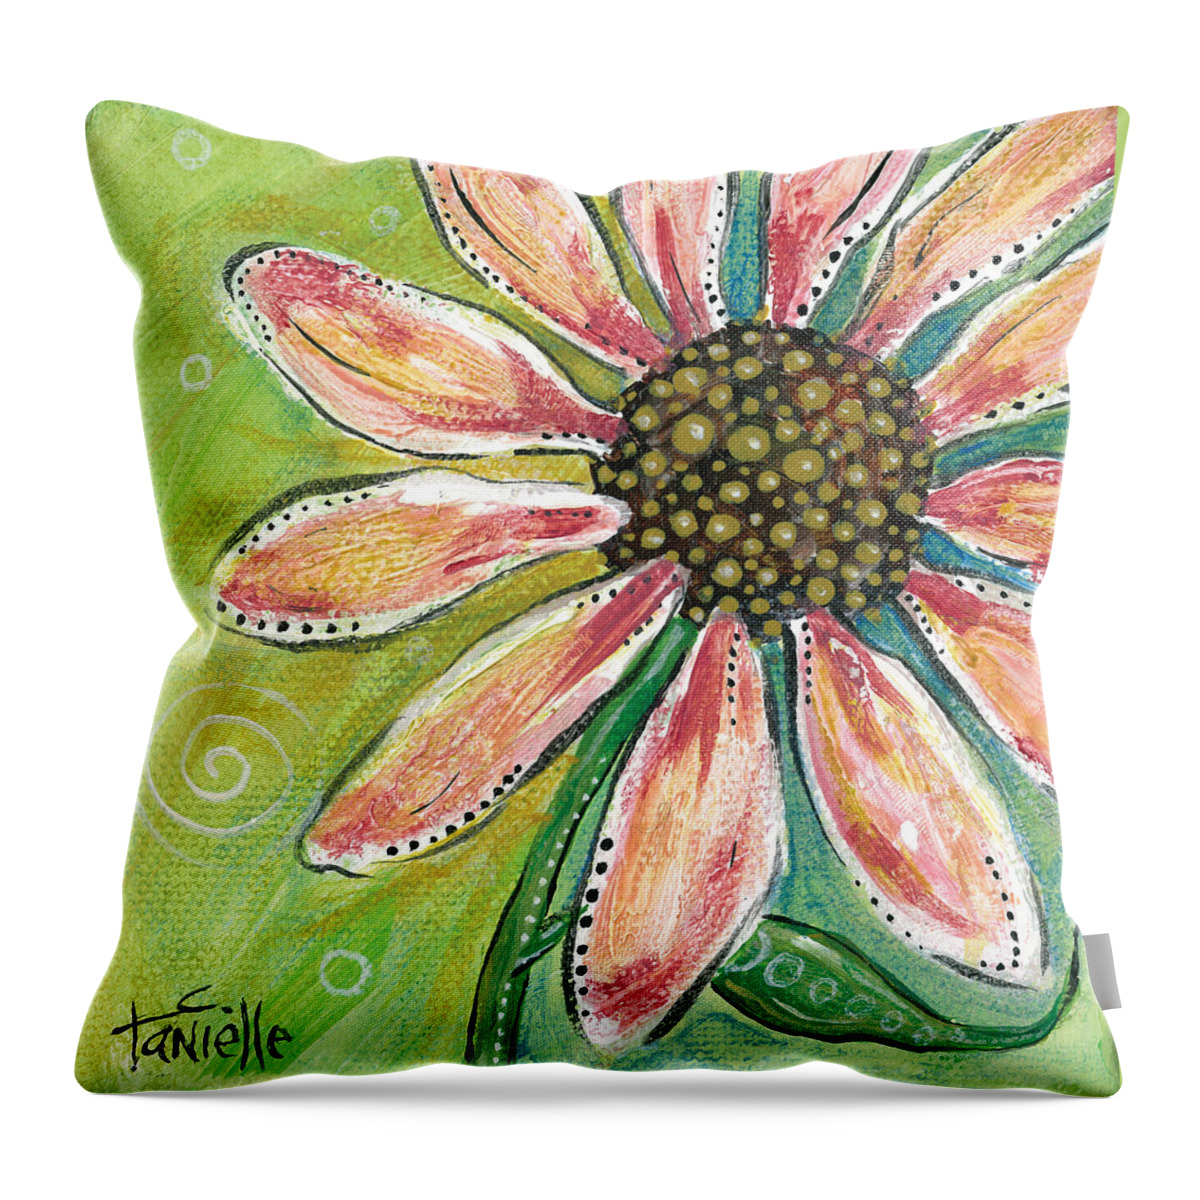 Floral Throw Pillow featuring the painting Pretty in Pink by Tanielle Childers